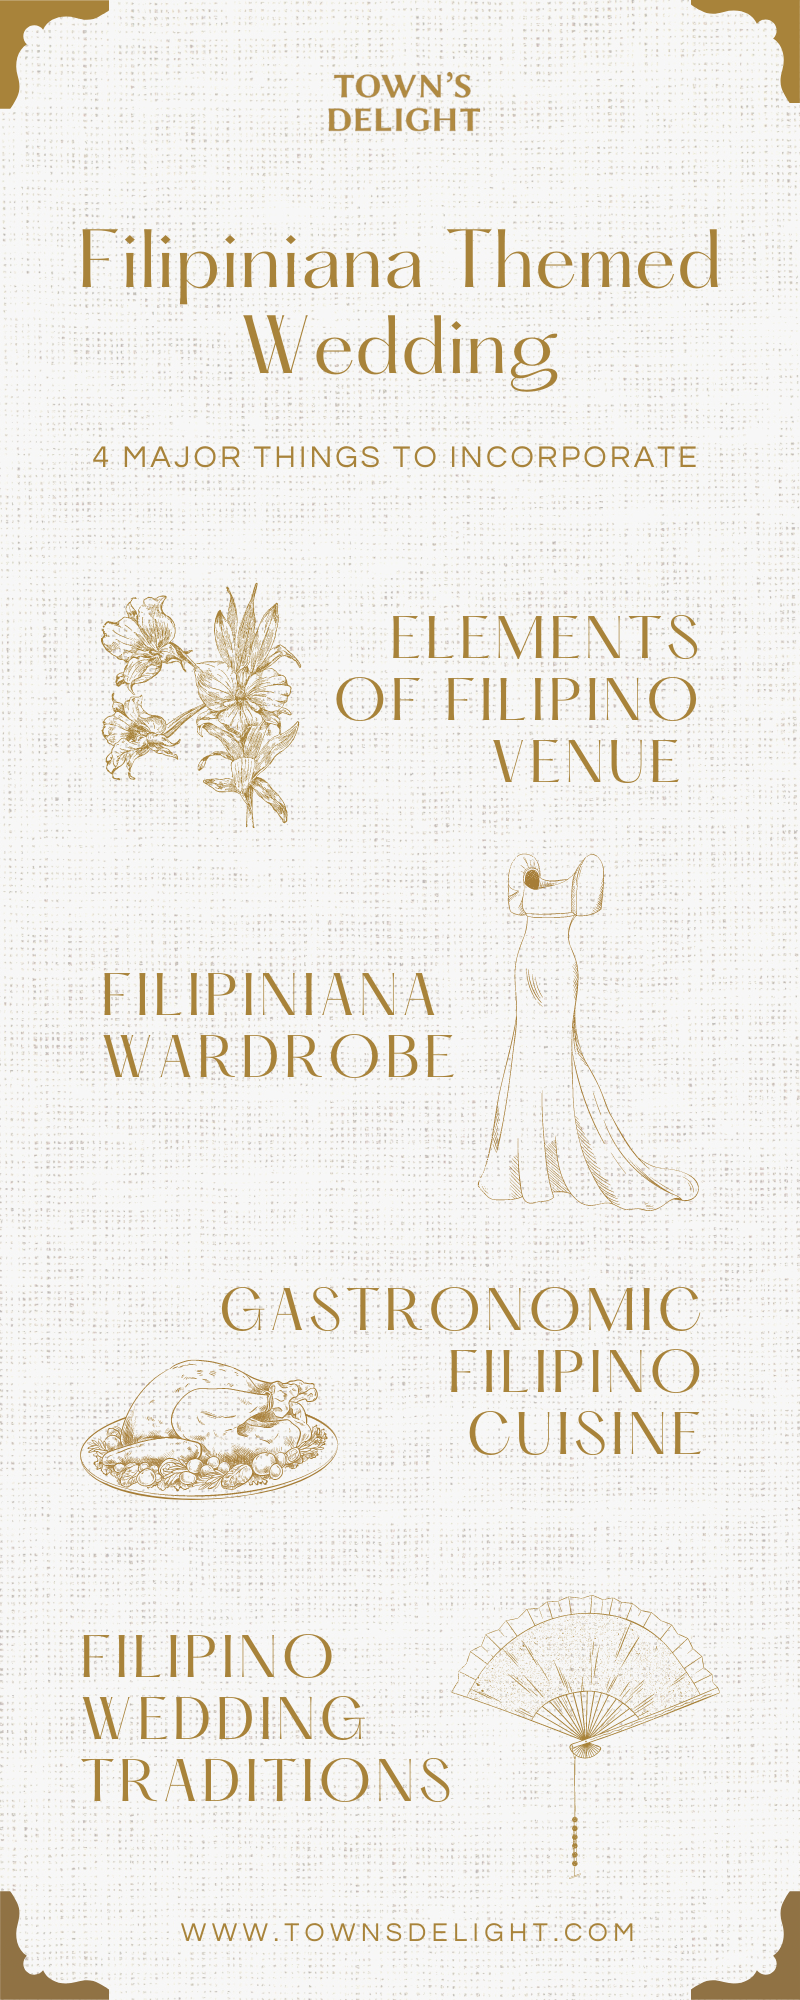 Town's Delight Catering & Events Filipinana Wedding Guide Philippines 1